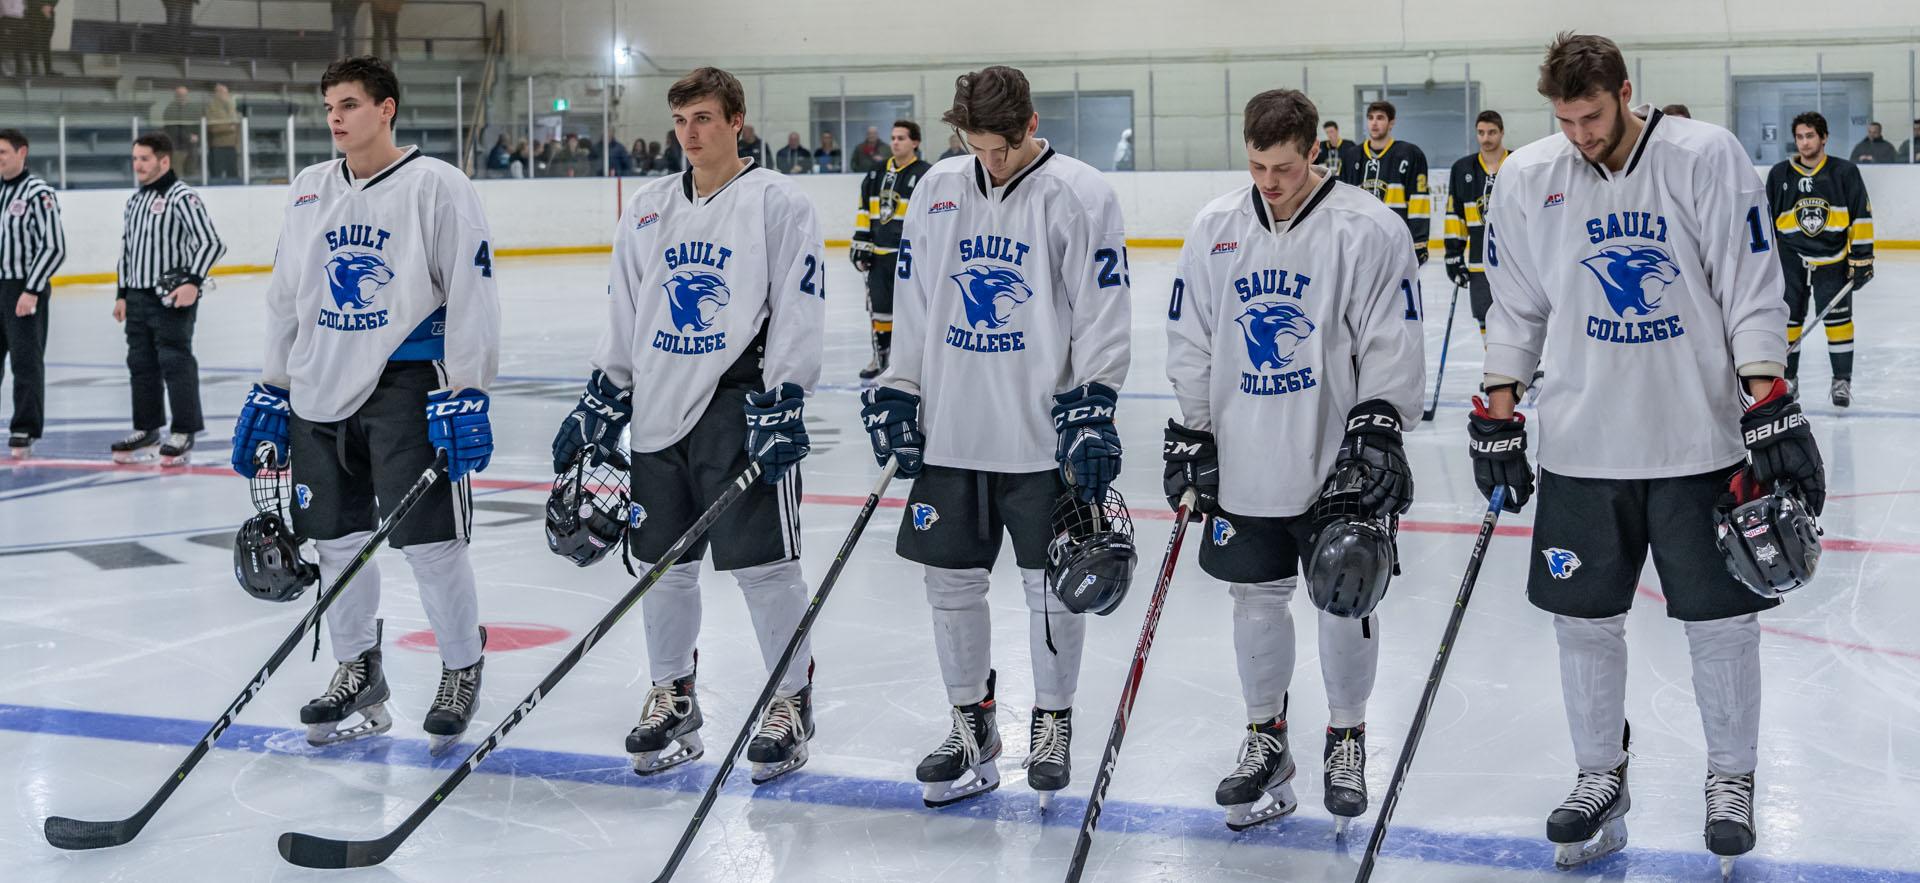 Hockey players lined up at blue line